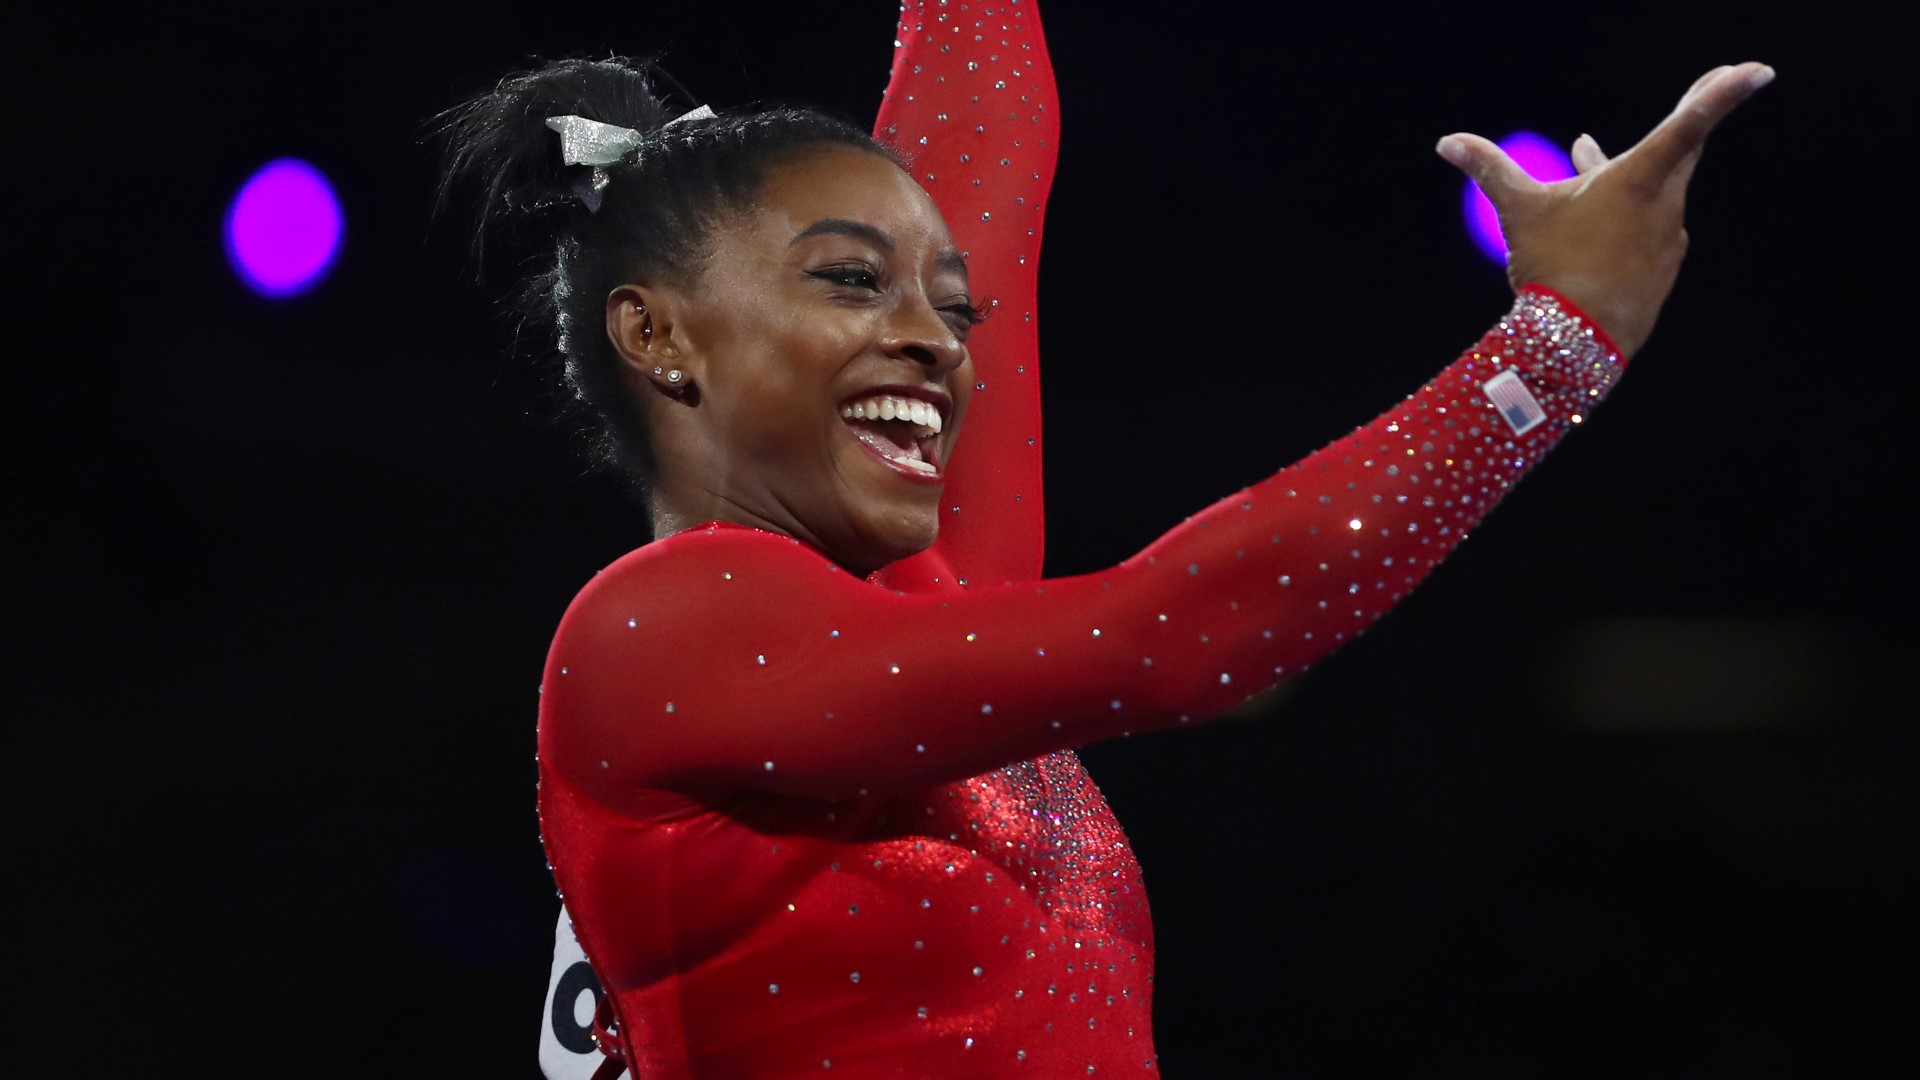 Olympic gymnast Simone Biles has posted a powerful message on social media blasting those who, over the years, have criticized her looks, body and wardrobe.